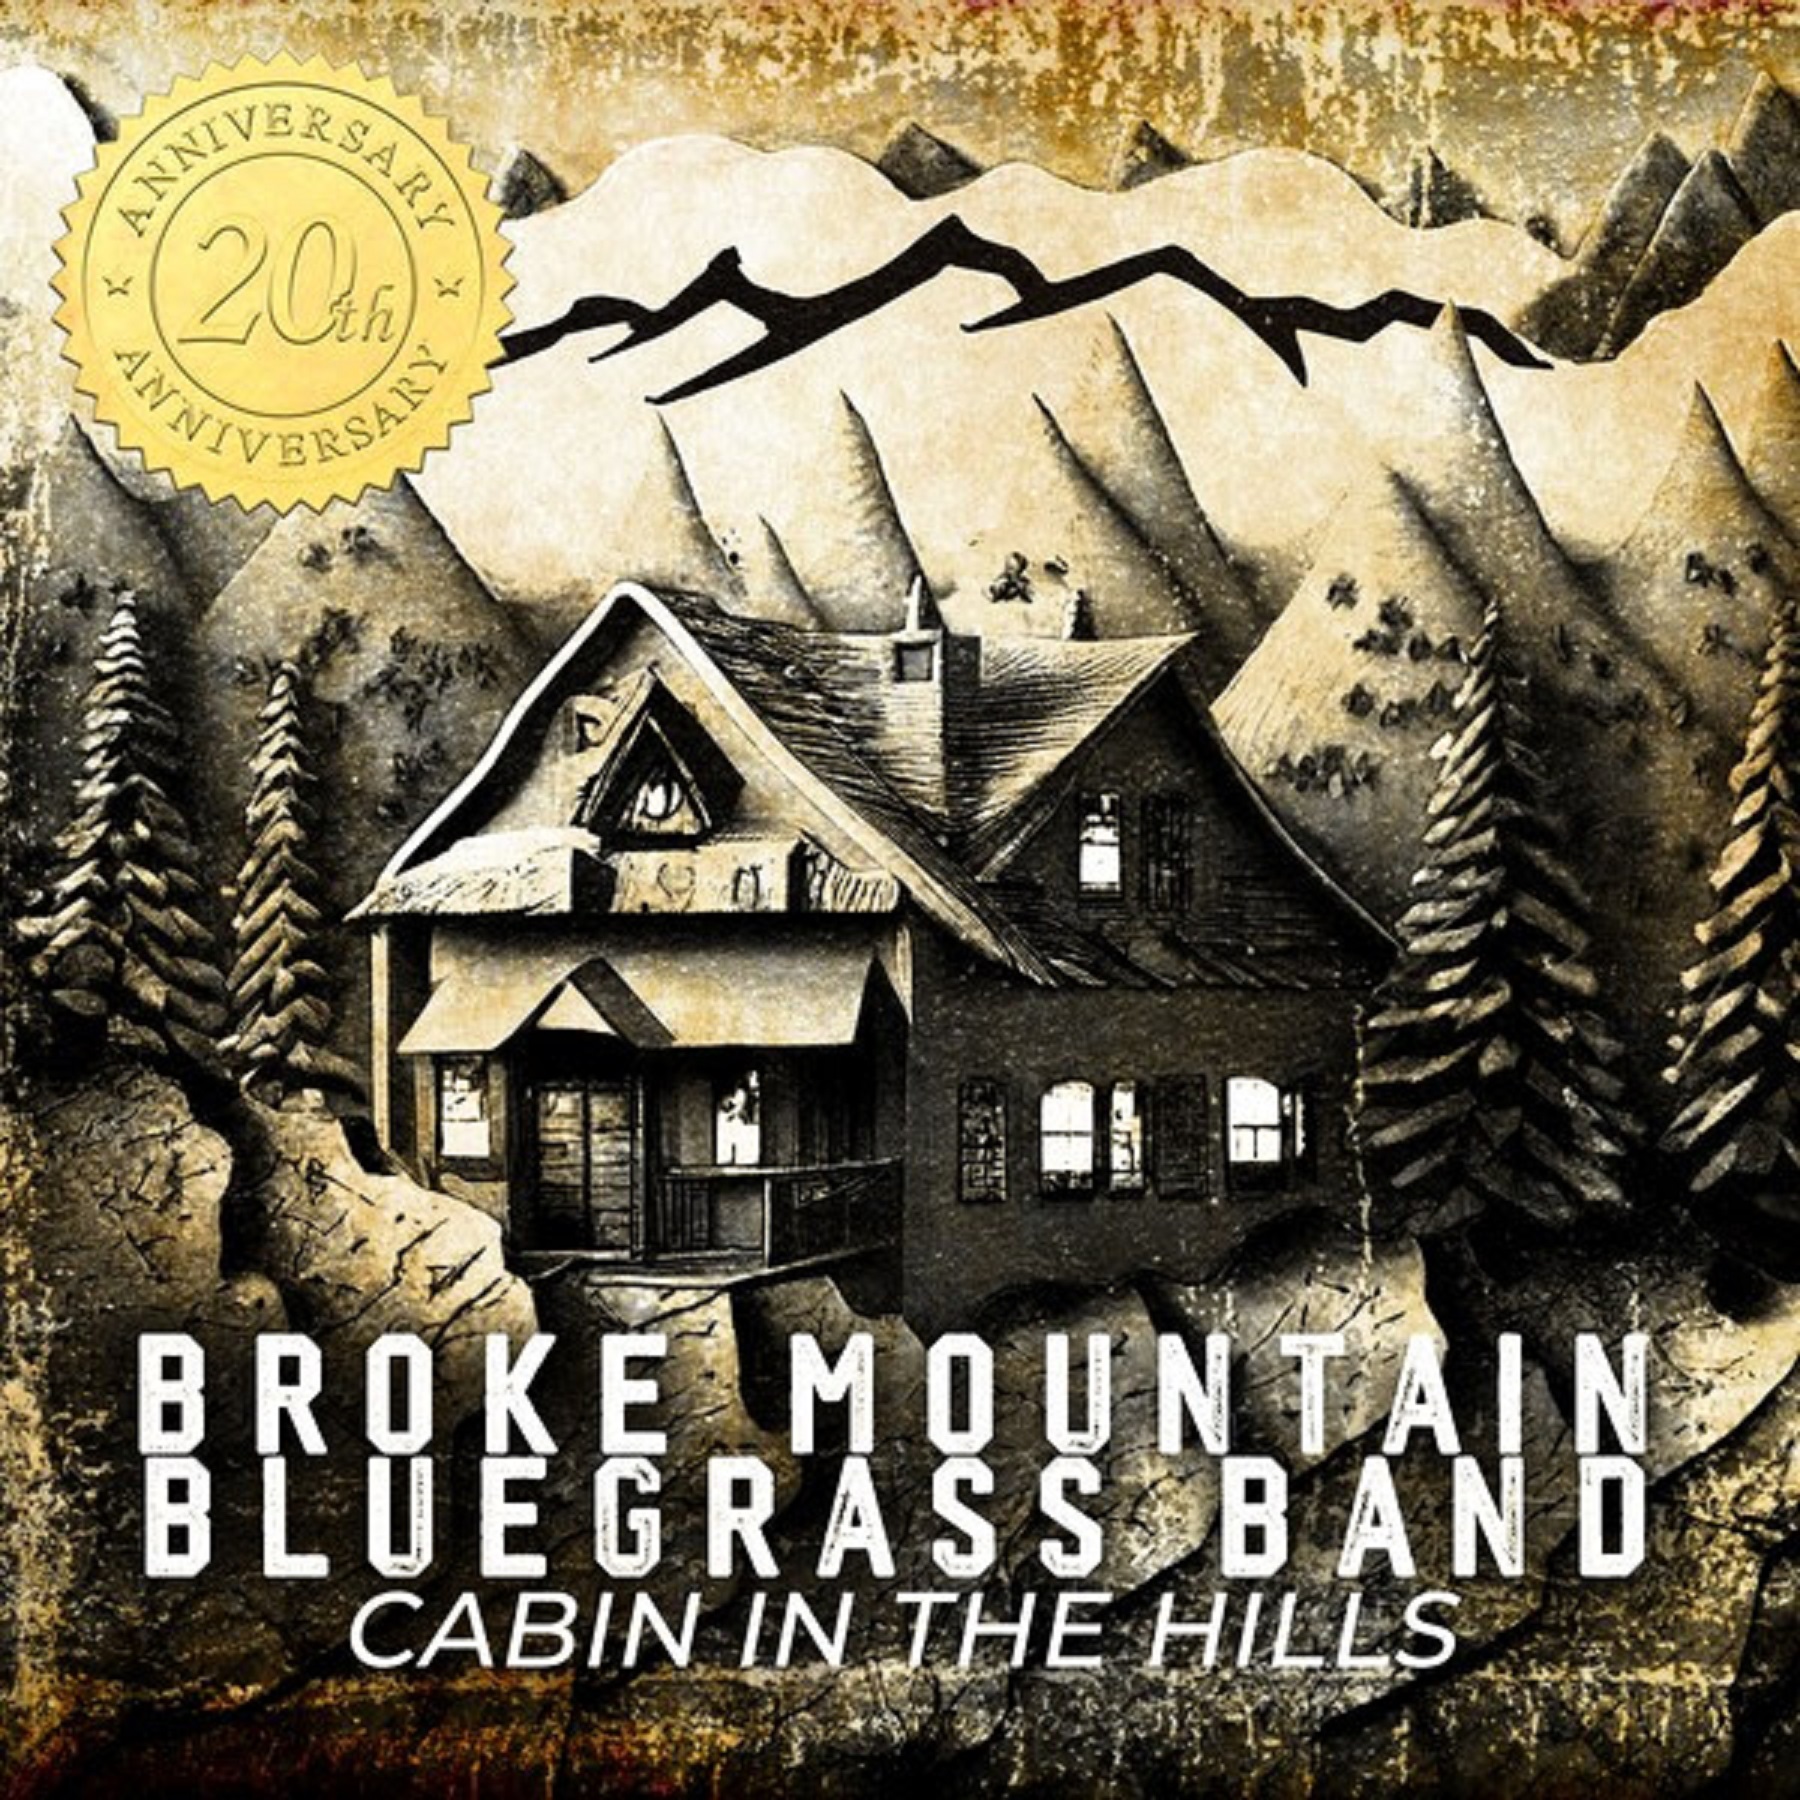 BROKE MOUNTAIN BLUEGRASS BAND CELEBRATES 20TH ANNIVERSARY WITH FIRST-EVER DIGITAL RELEASE COMING OUT ON NOVEMBER 3RD